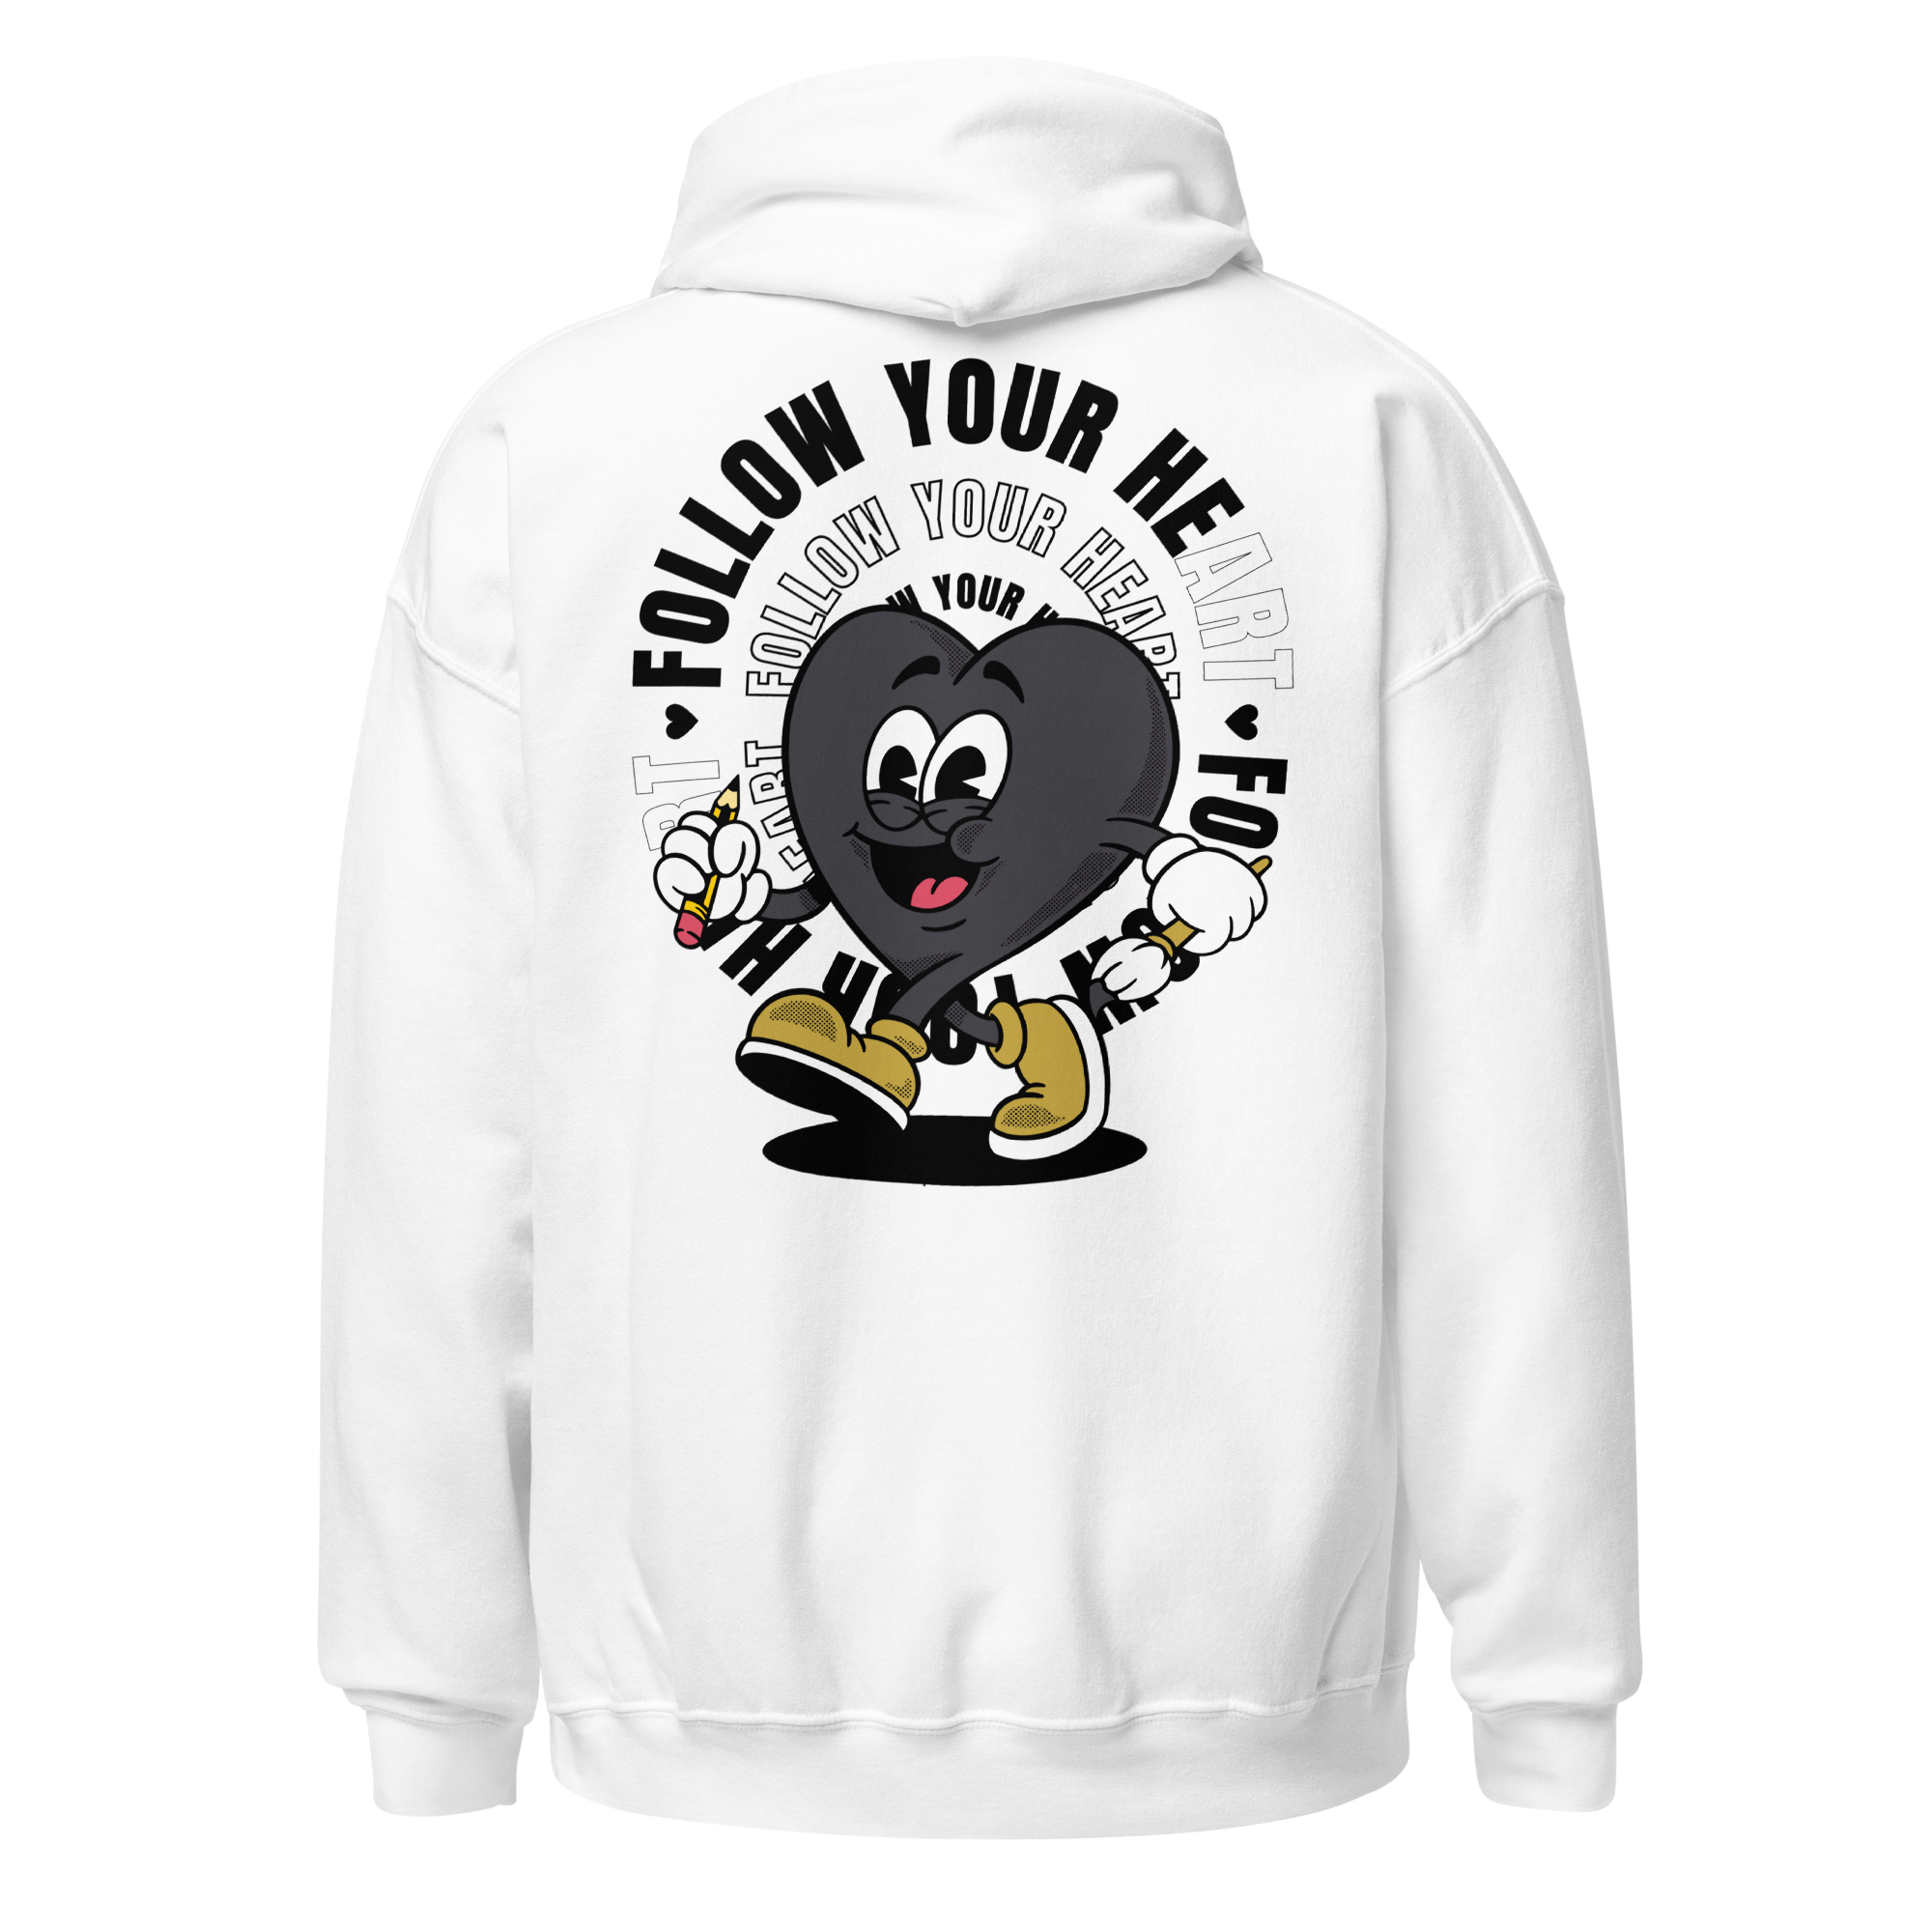 Follow Your Heart Embroidery Hoodie - Black and White (Unisex)